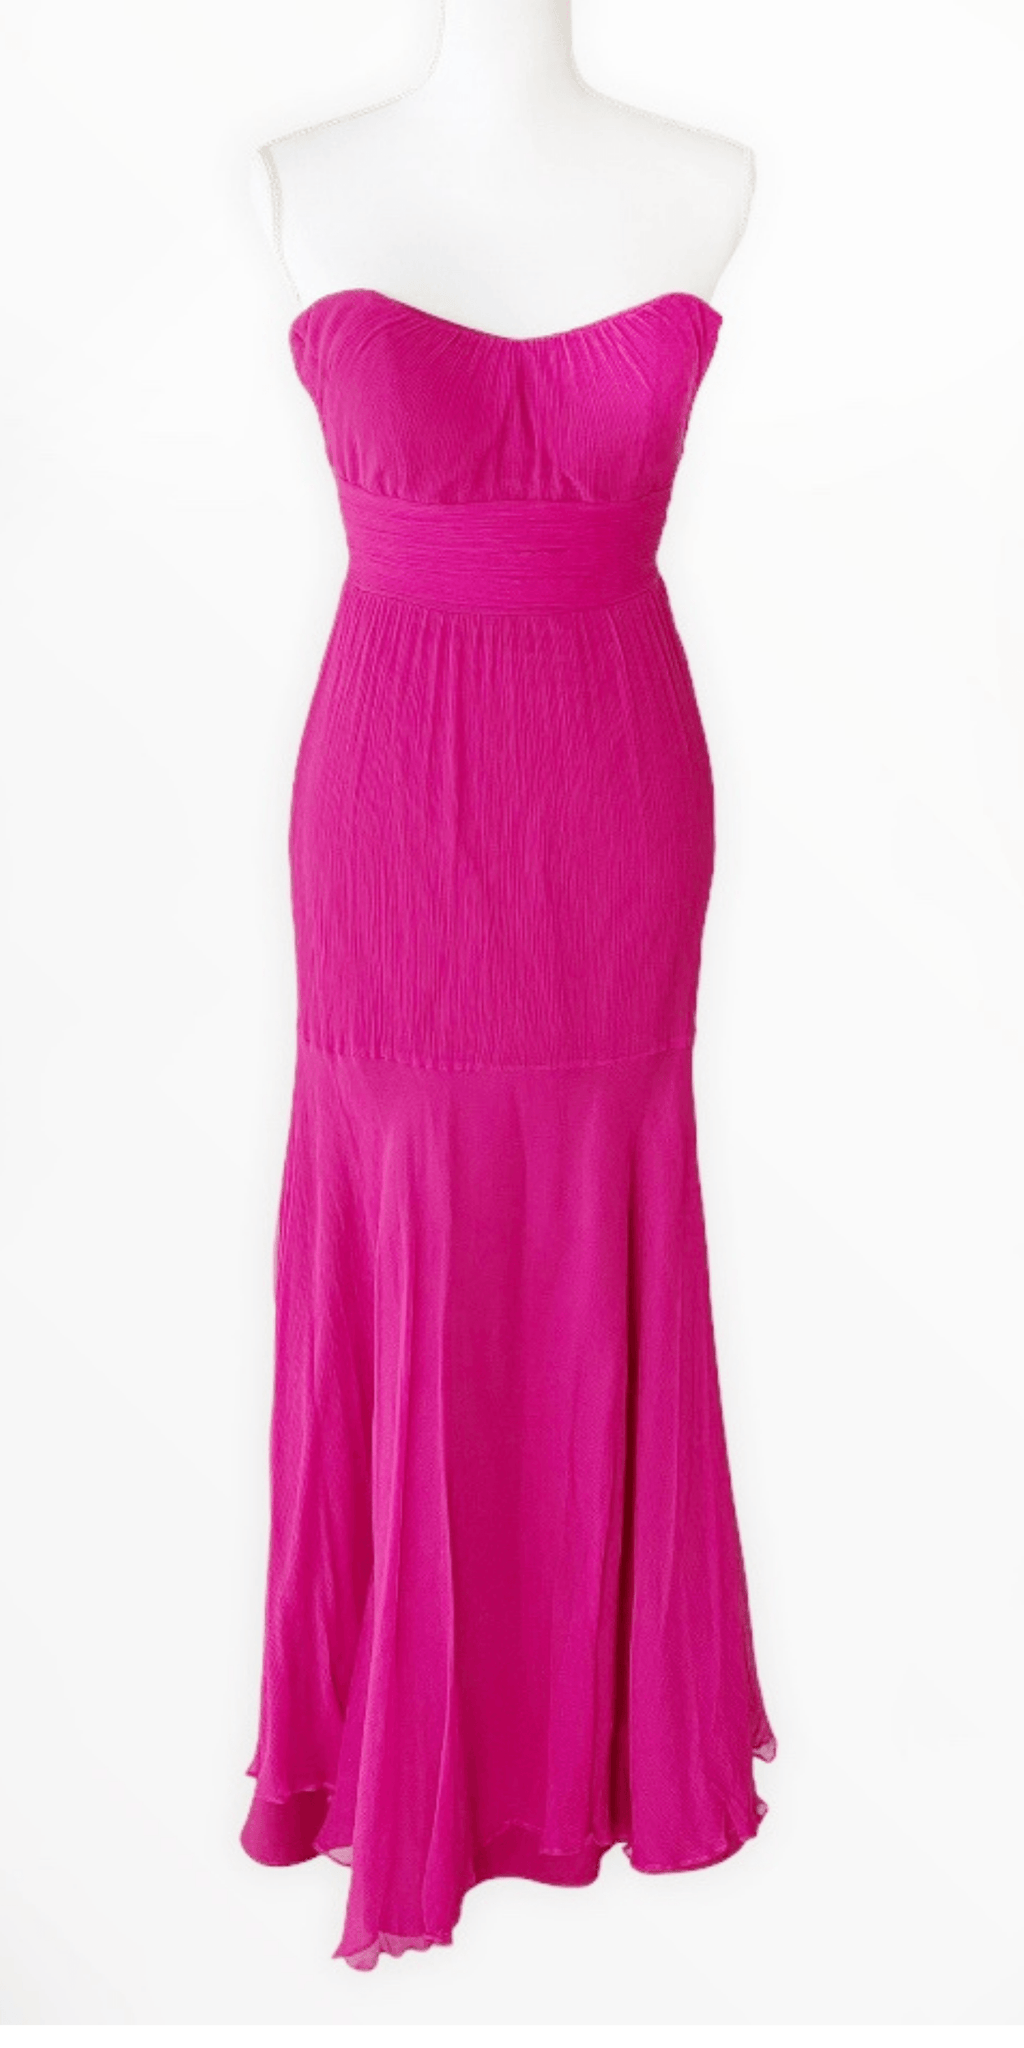 Chiffon Sweetheart Strapless Gown - Simply Borrowed Dresses